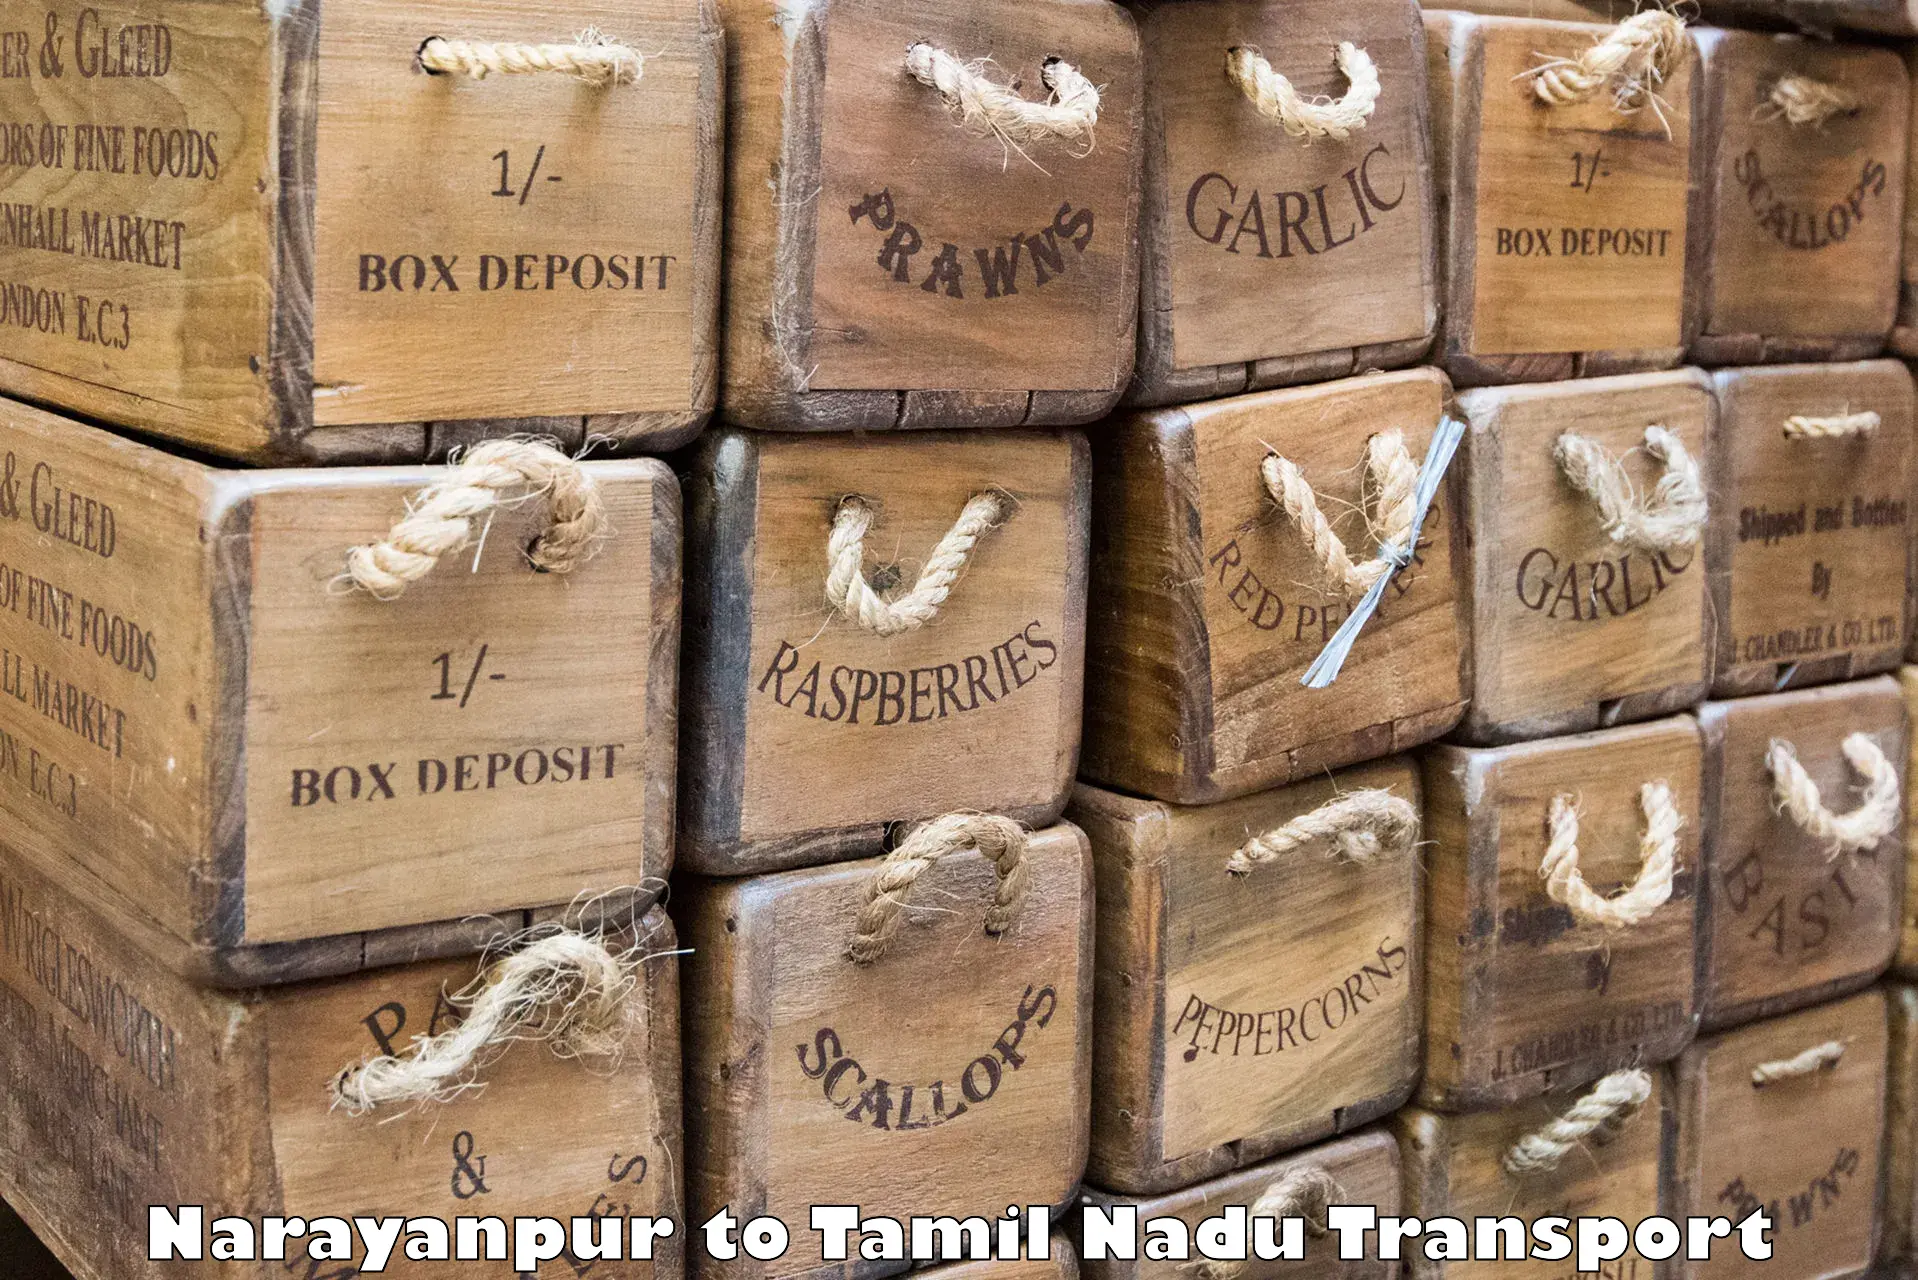 India truck logistics services Narayanpur to Erode